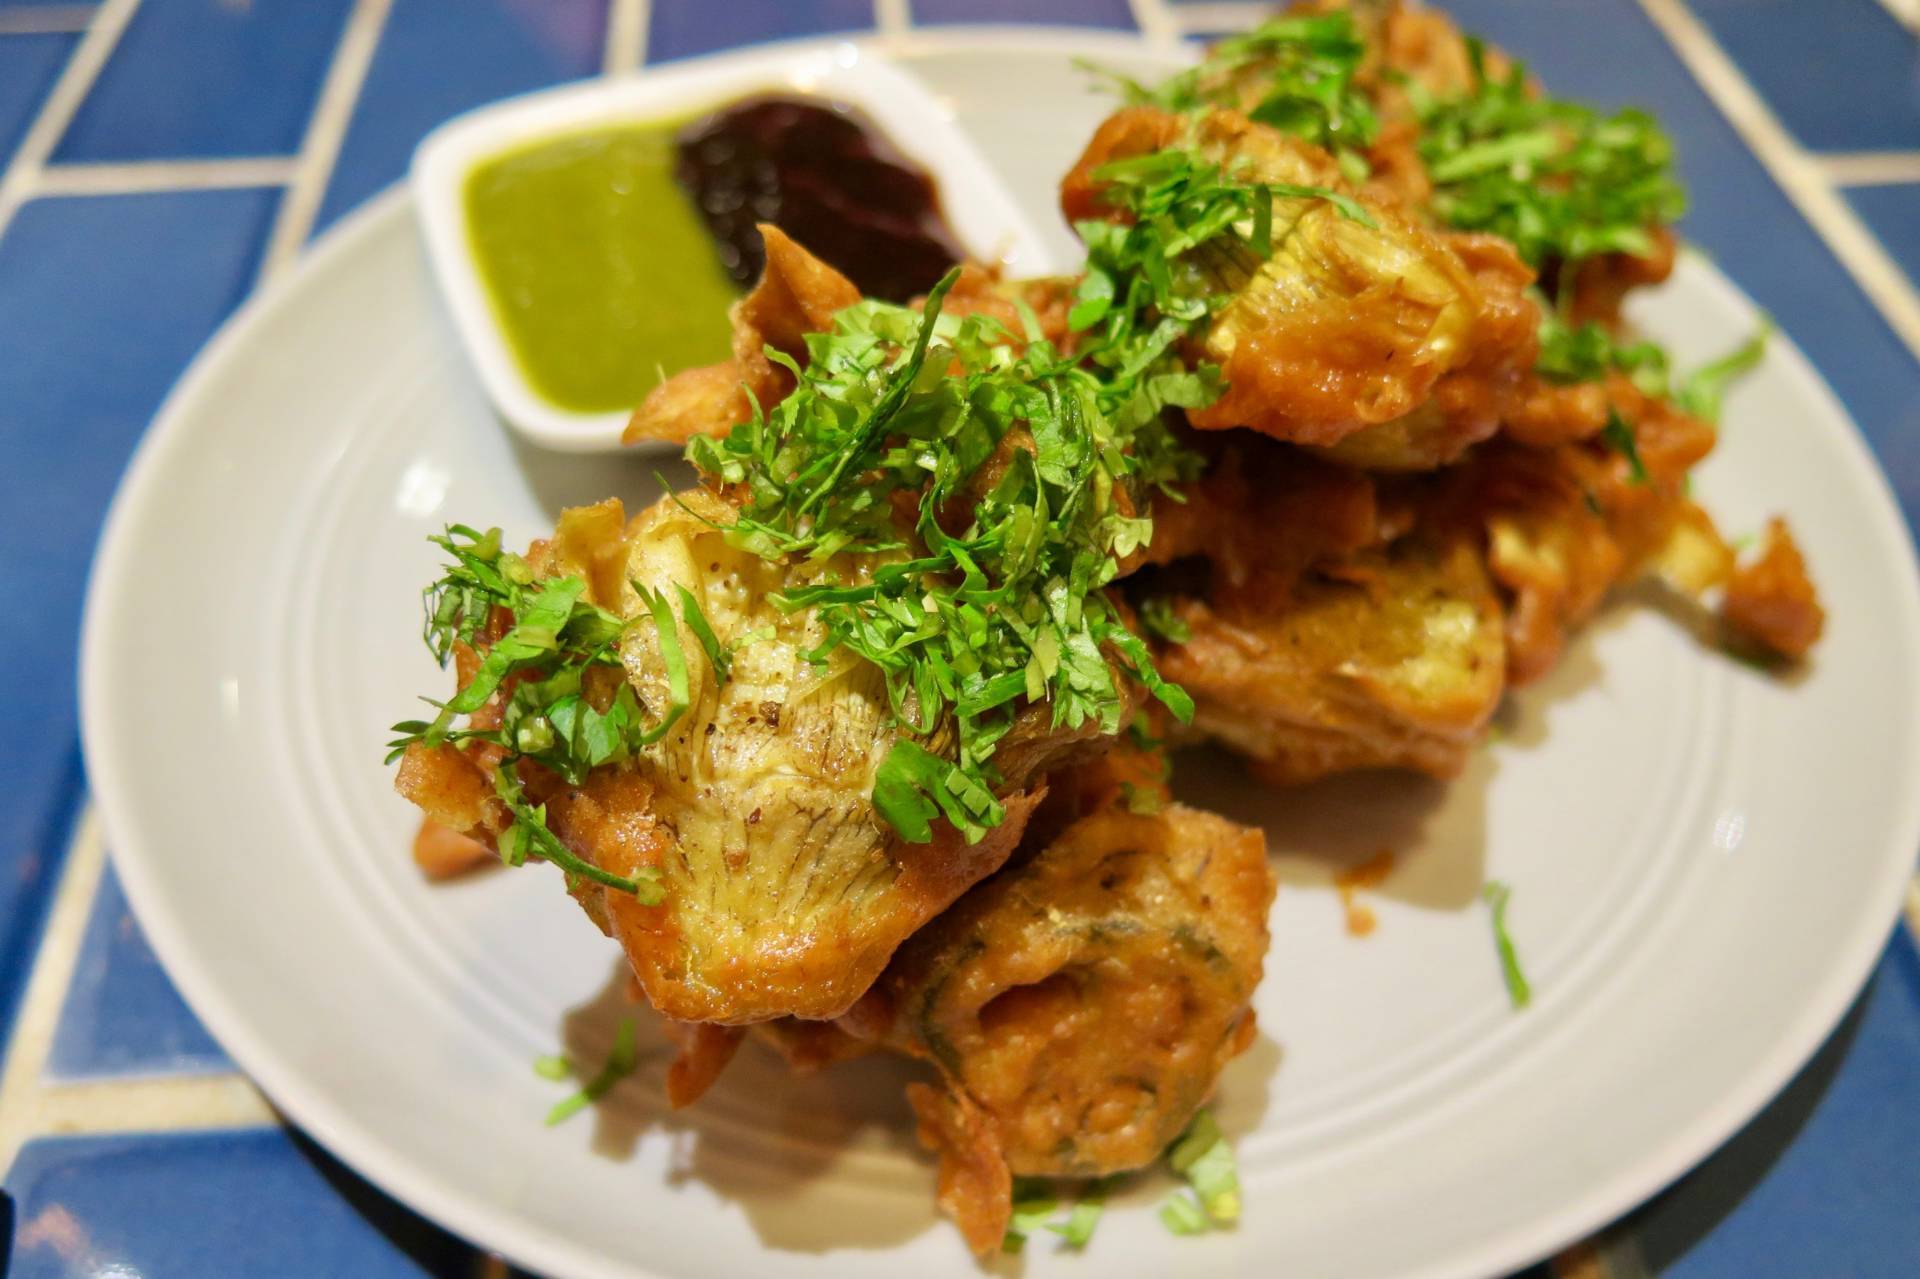 The artichoke pakoras are a great place to start.